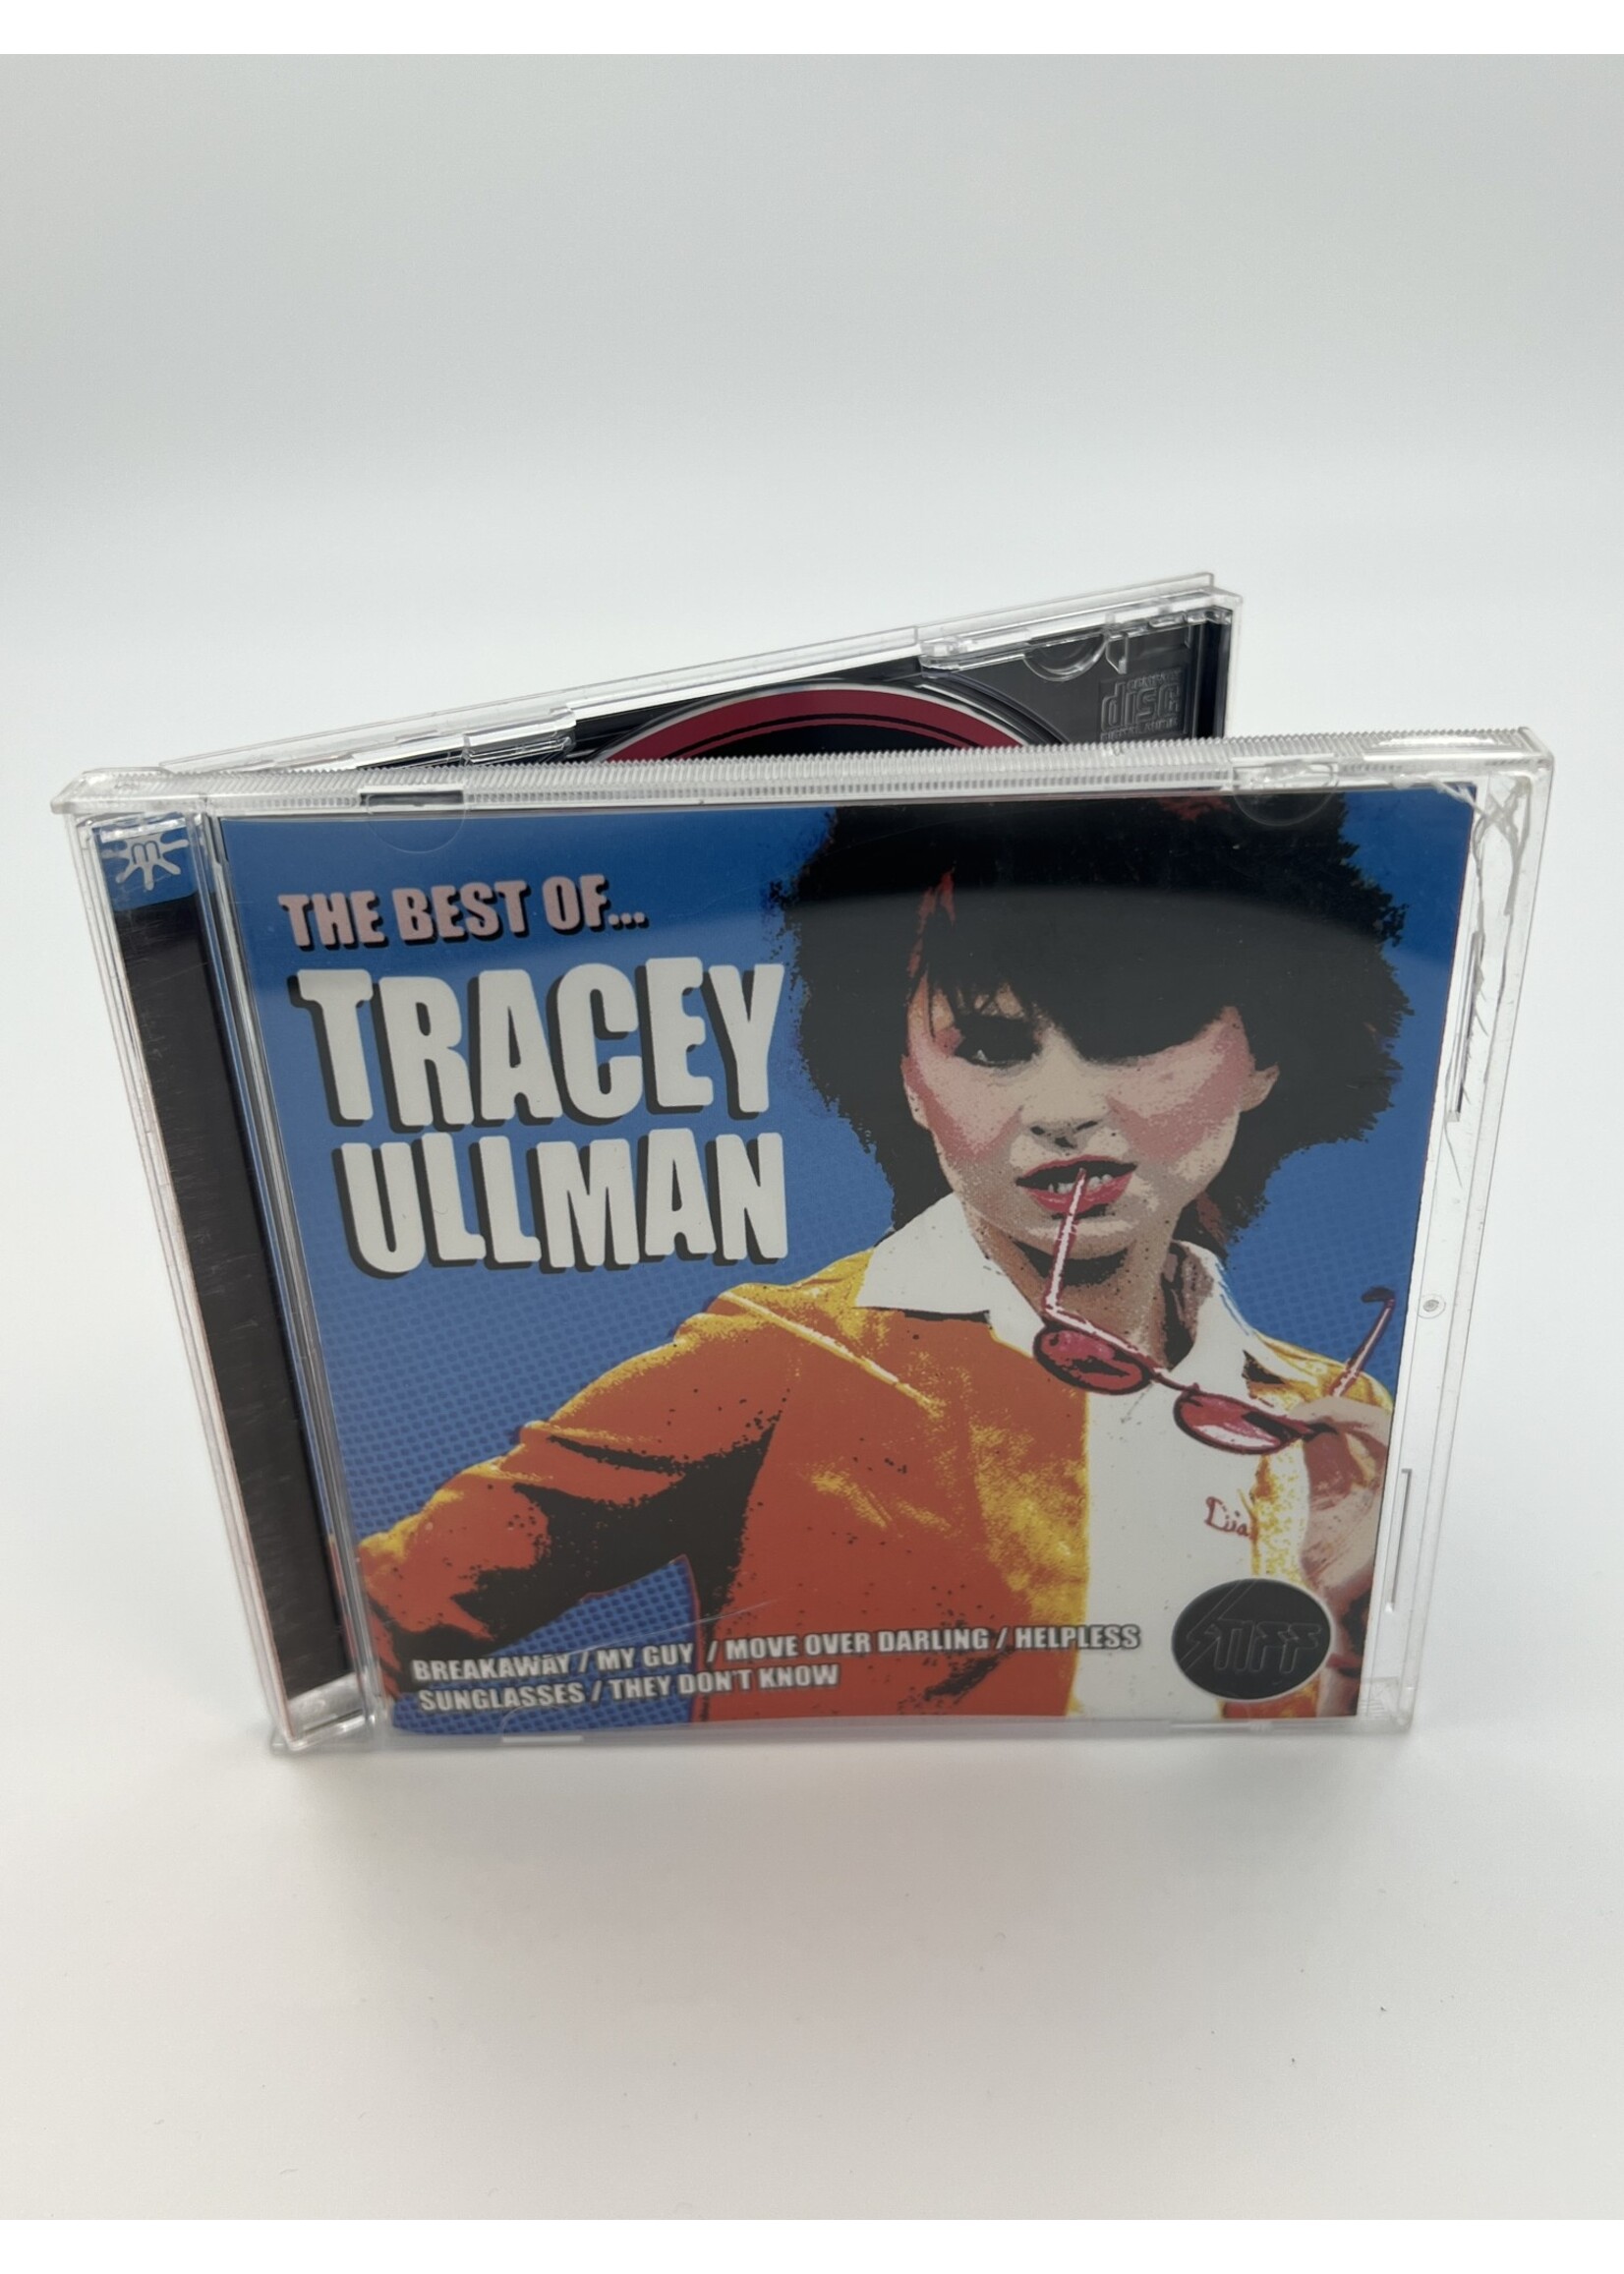 CD The Best Of Tracy Ullman CD